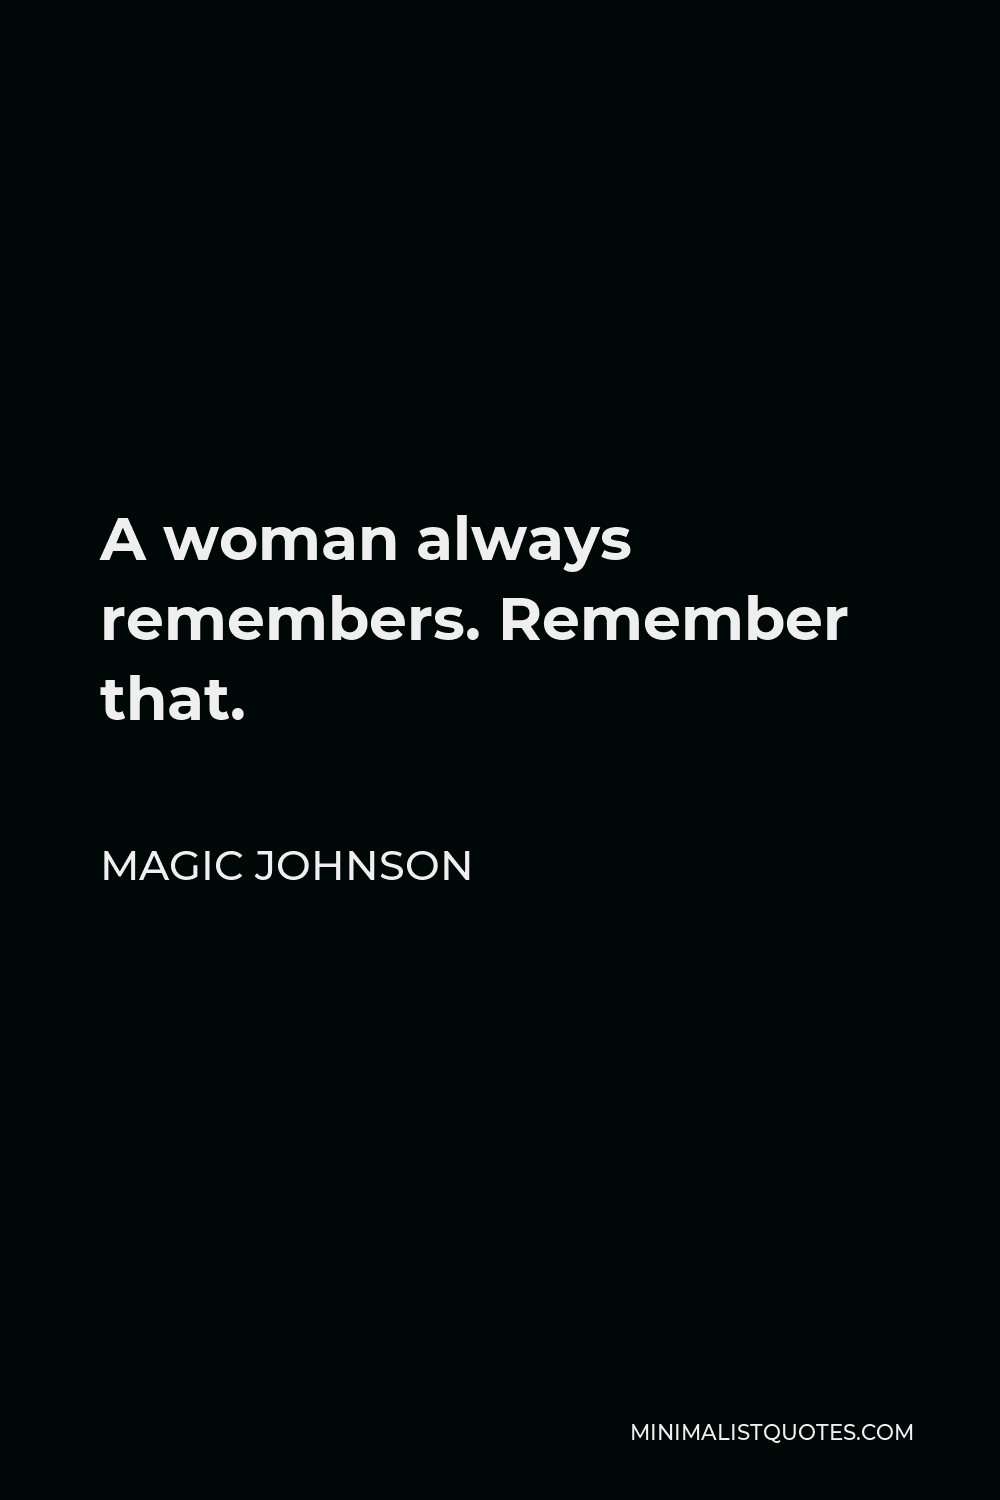 Magic Johnson Quote - A woman always remembers. Remember that.